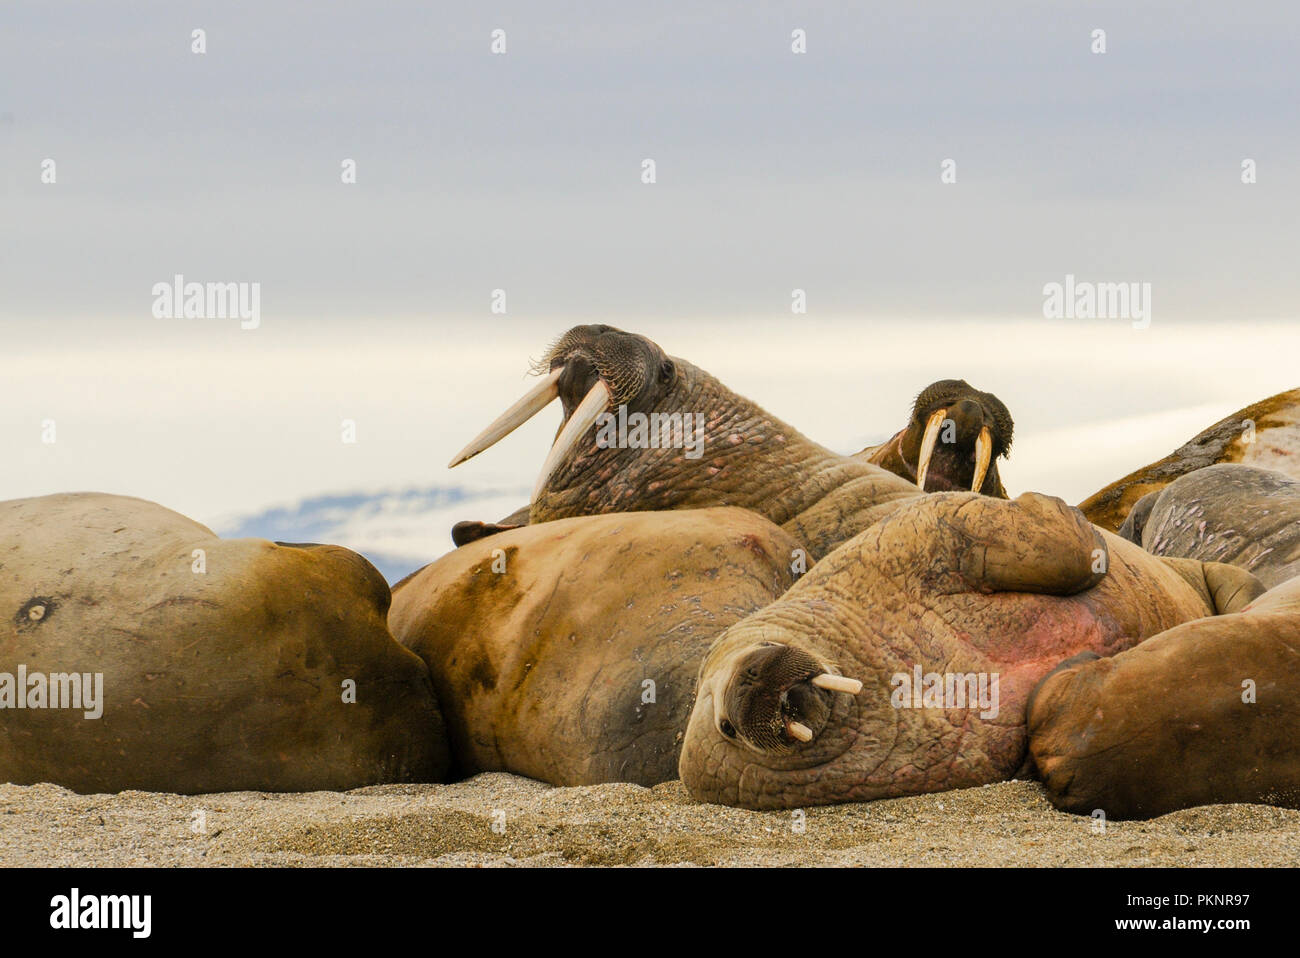 Walrus (Odobenus rosmarus) in a Mass Huddle on the Beach off the Arctic Ocean on the Coast of Spitsbergen Svalbard Archipelago in Northern Norway Stock Photo